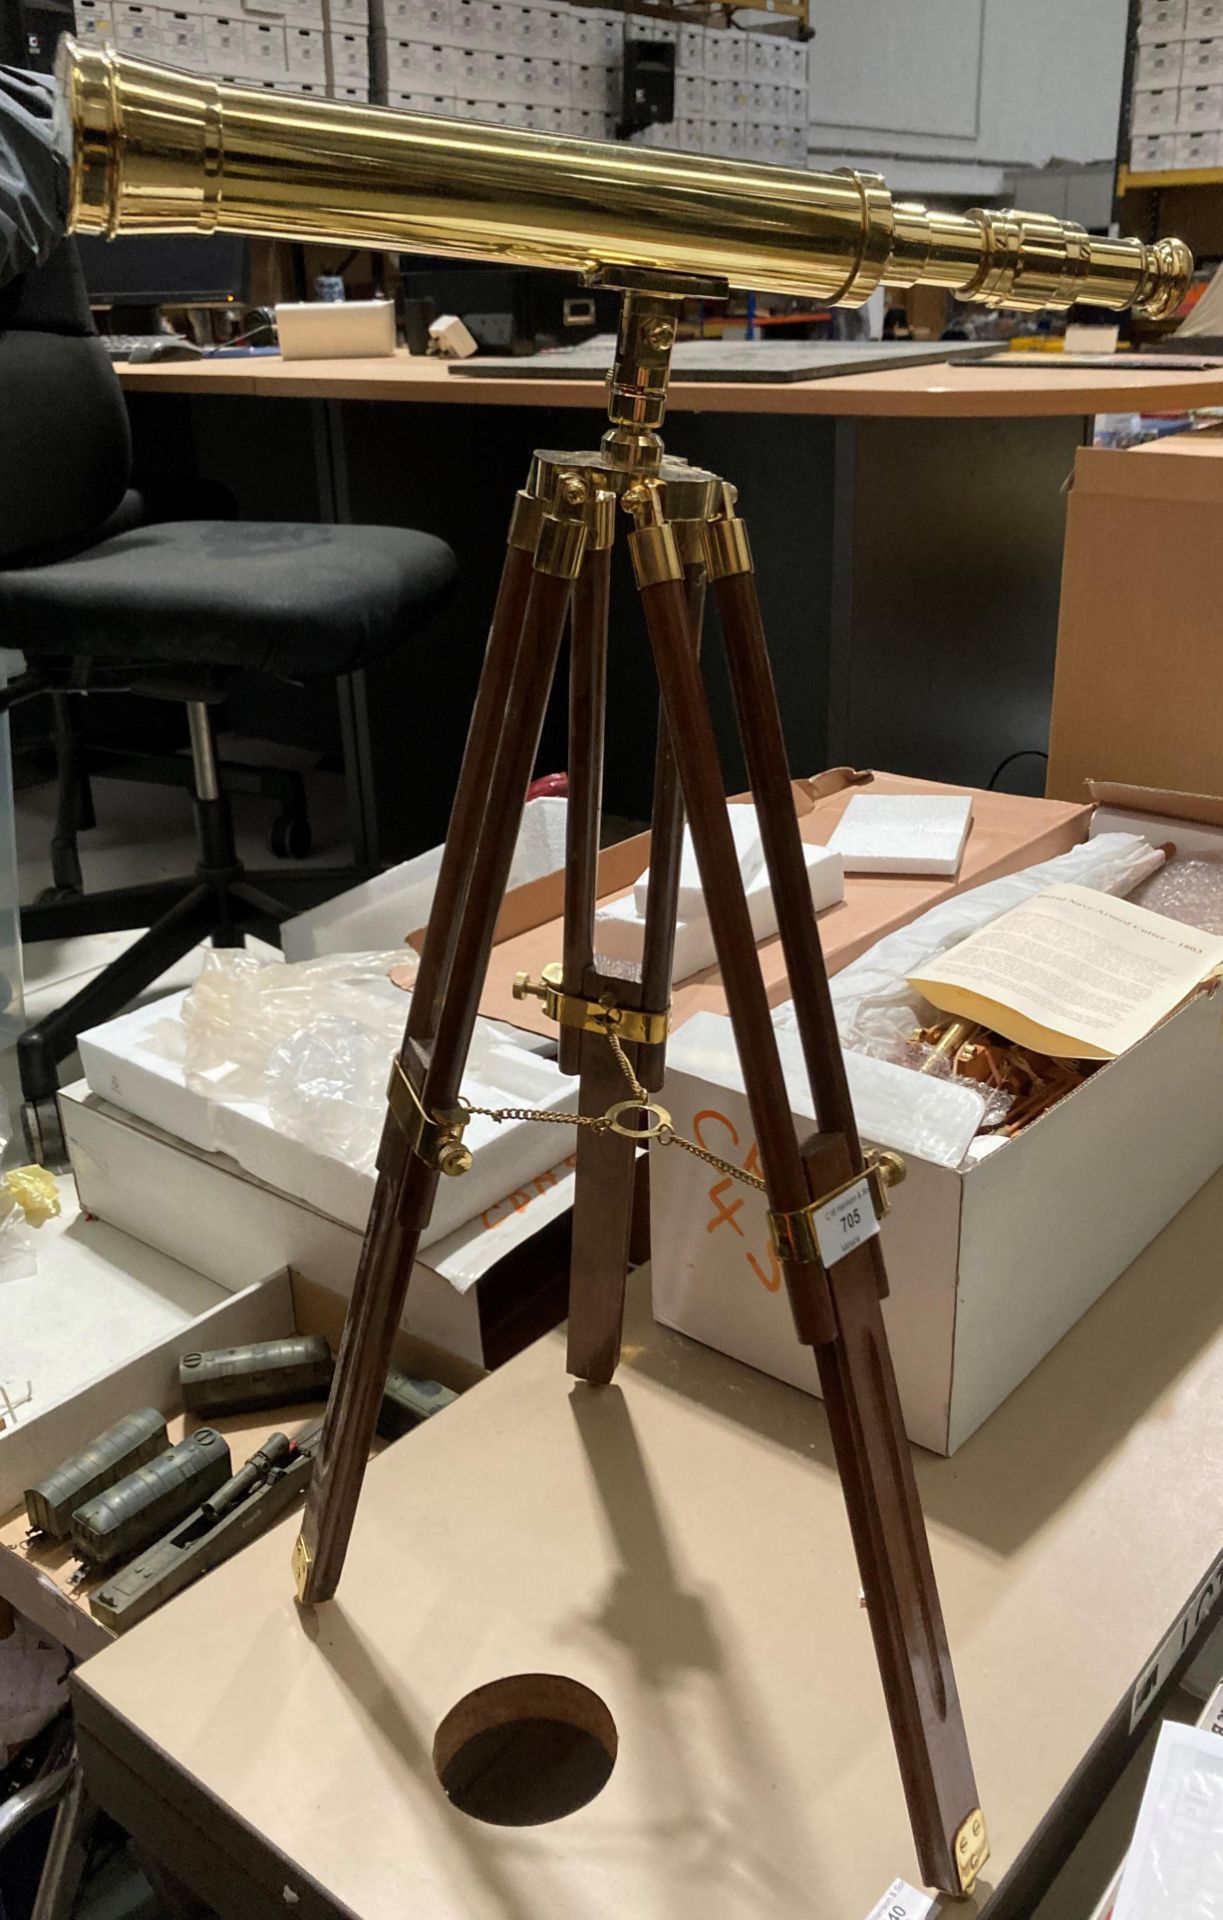 A modern brass telescope by Nauticalia on wooden and brass stand (saleroom location: S2 table